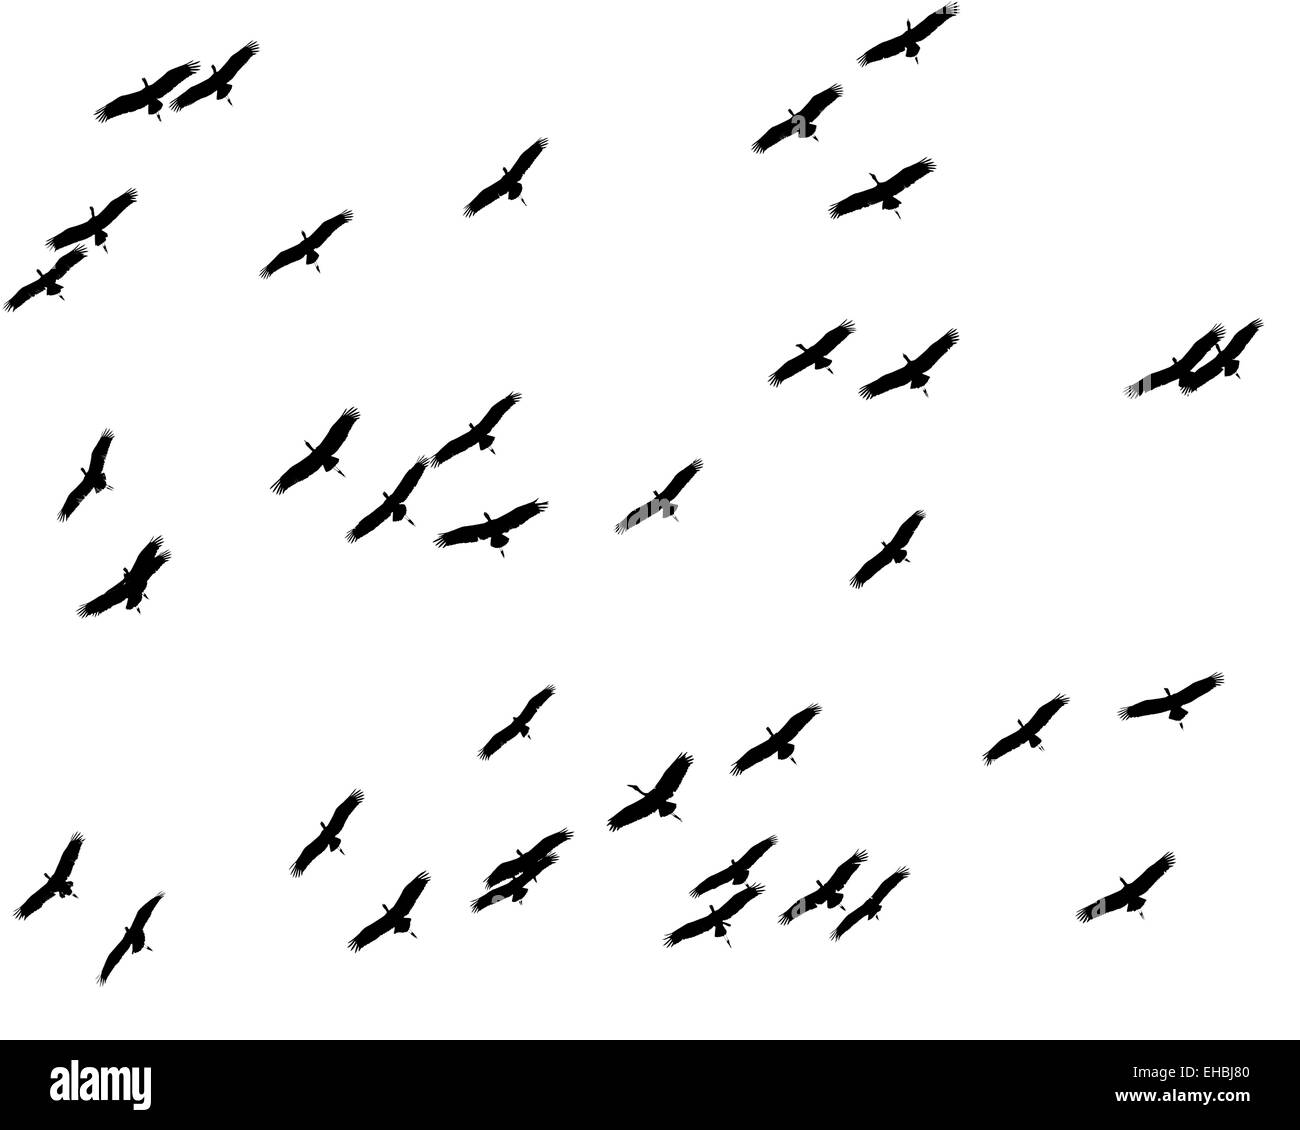 A graphical composition of a flock of storks, silhouetted against the sky. Stock Photo